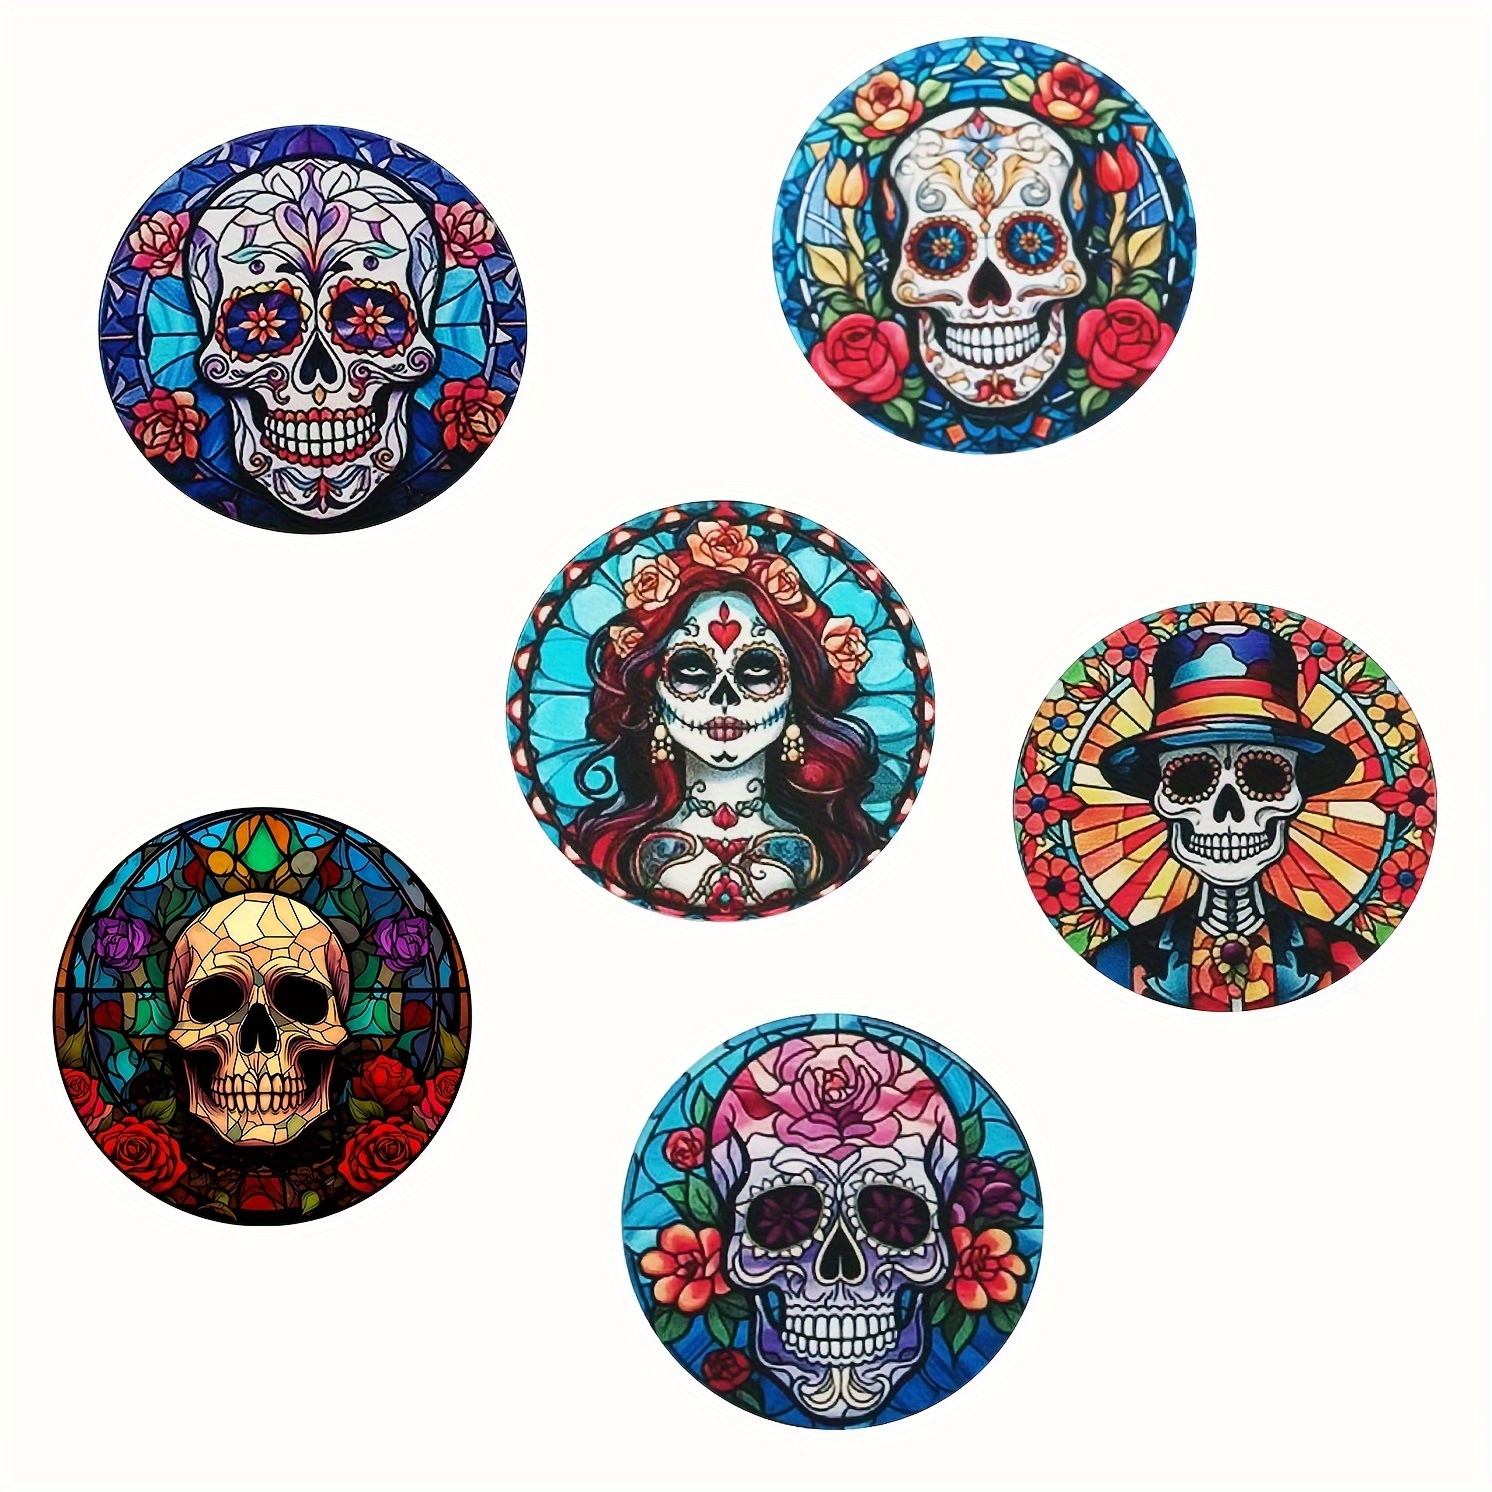 

6pcs Day Of The Dead Coasters, Heat-resistant Mats For Home Kitchen, Designs, Perfect For Coffee Mugs & Cups, Festive Table Decor